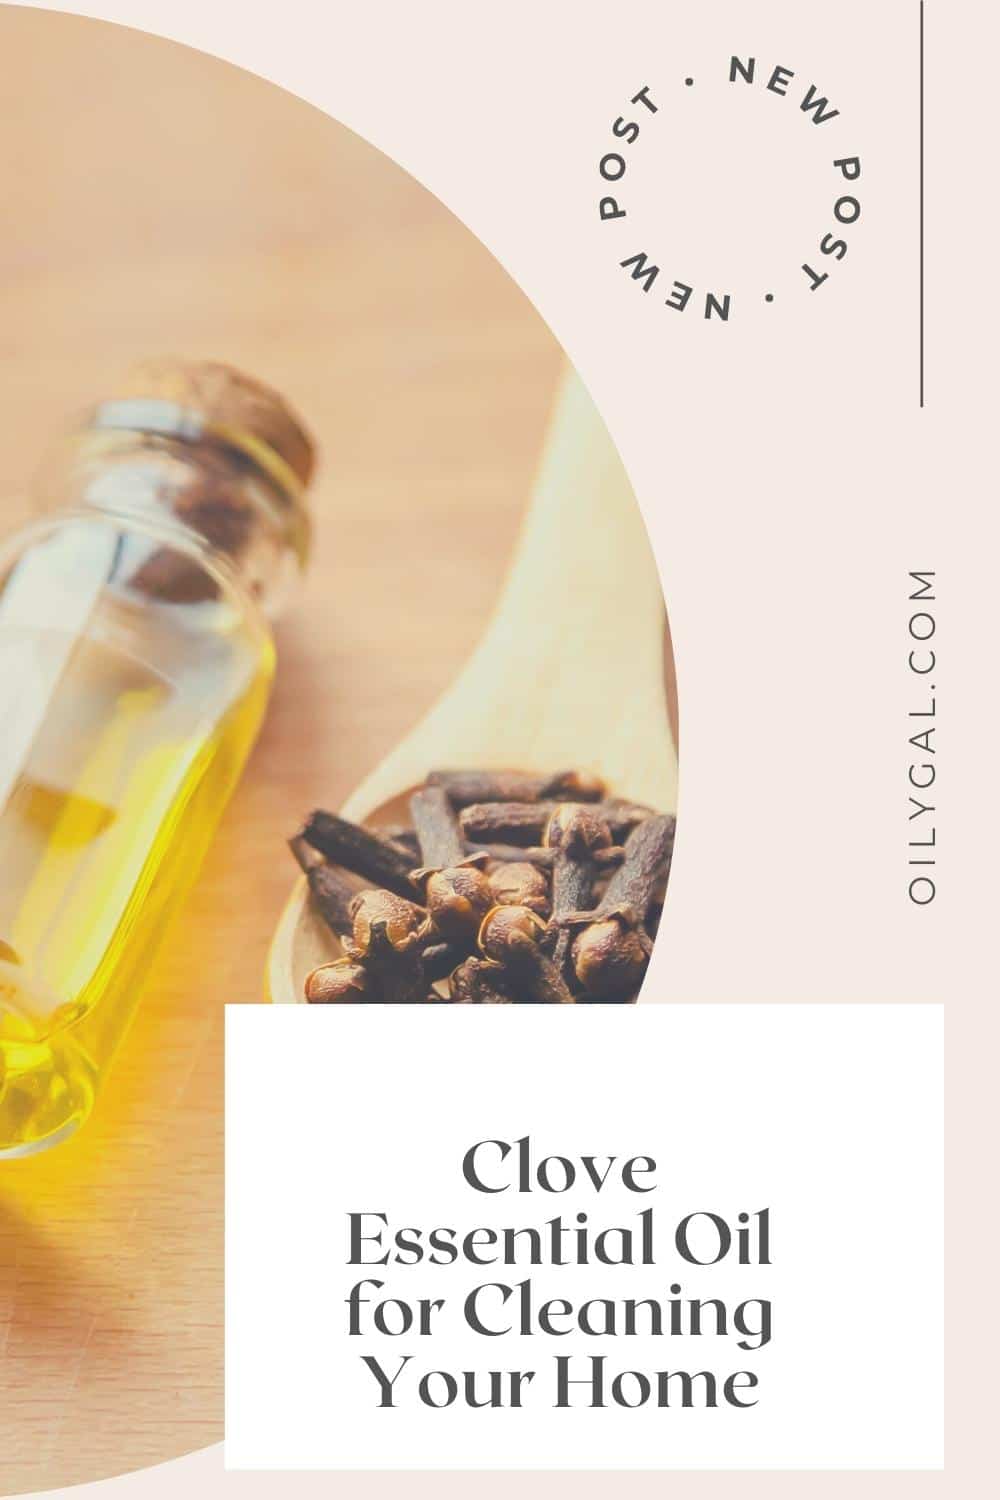 Clove Essential Oil for Cleaning Your Home